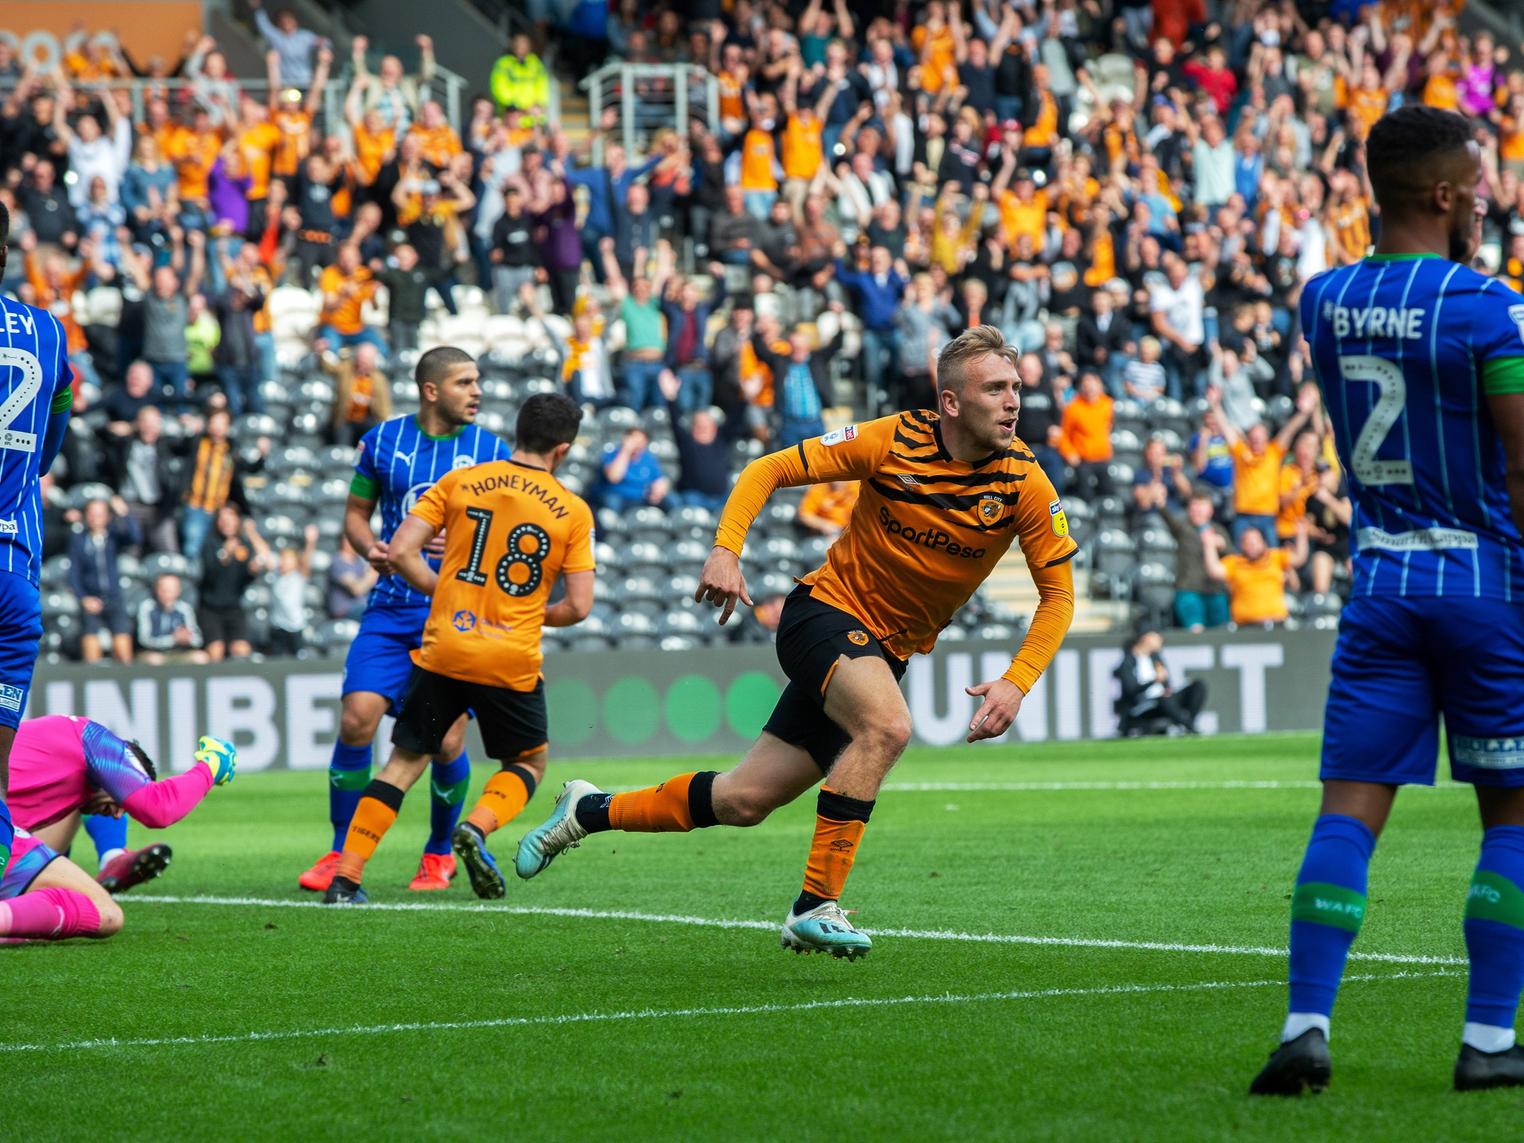 Hull City star Jarrod Bowen has claimed his future at the KCOM Stadium is out of his hands with his contract set to expire in the summer amid interest from the Premier League. (Hull Live)